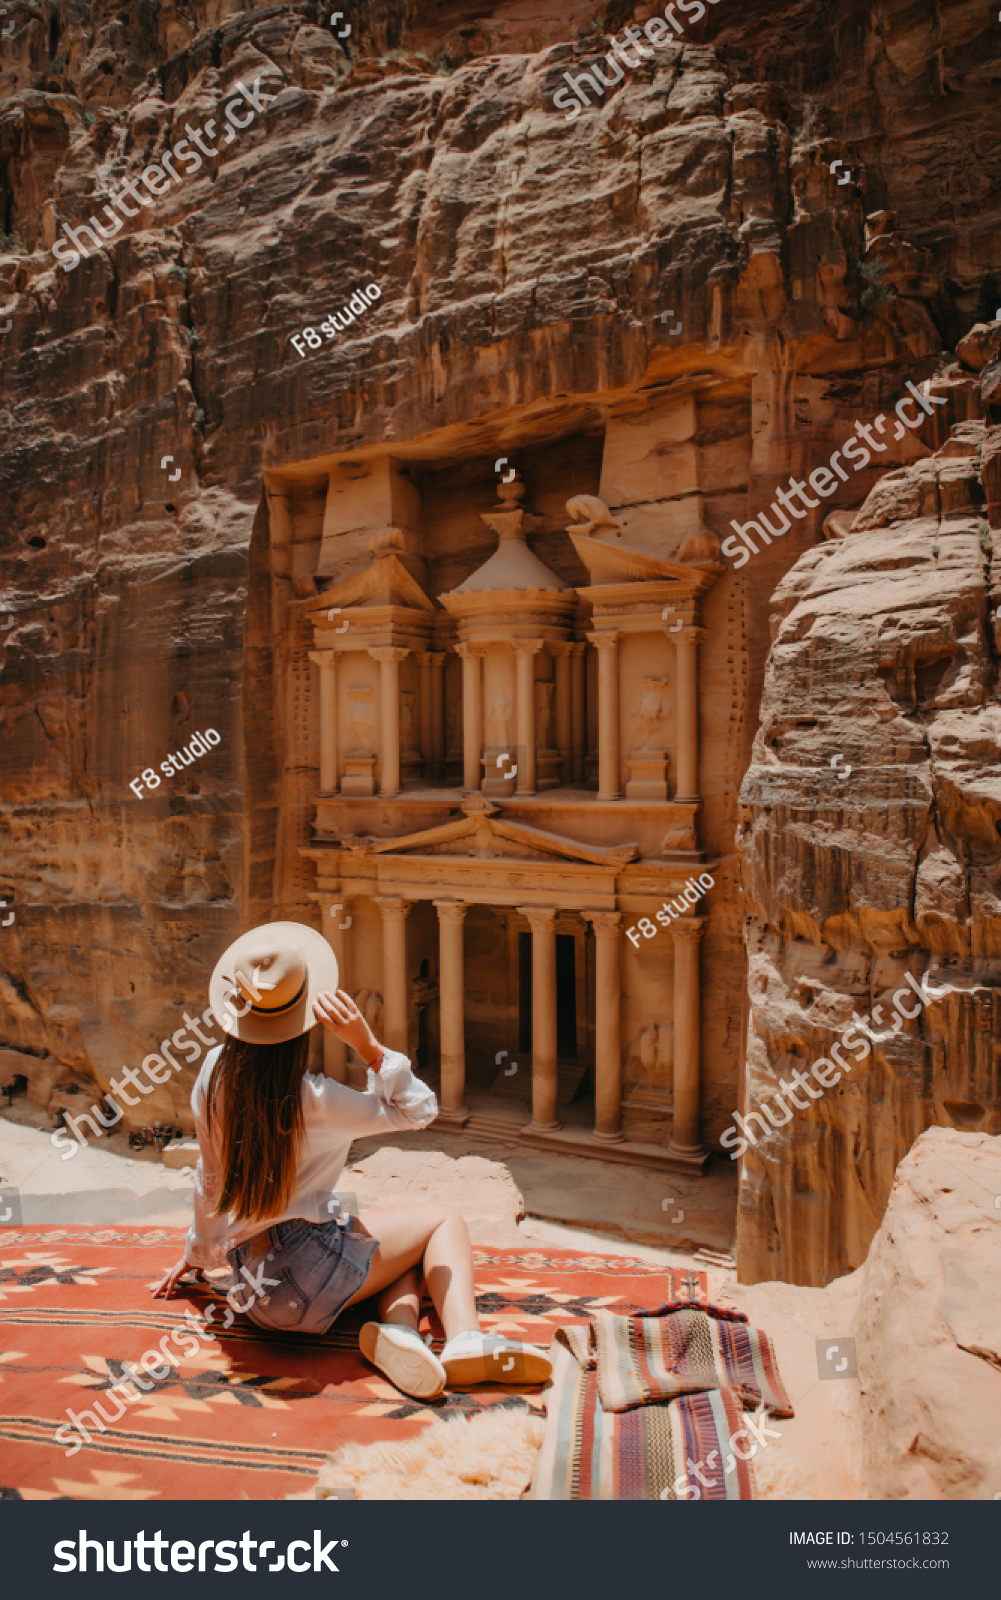 Aerial view of young woman tourist sitting on a cliff after reaching the top, Al Khazneh in the ancient city of Petra, Jordan, UNESCO World Heritage Site #1504561832